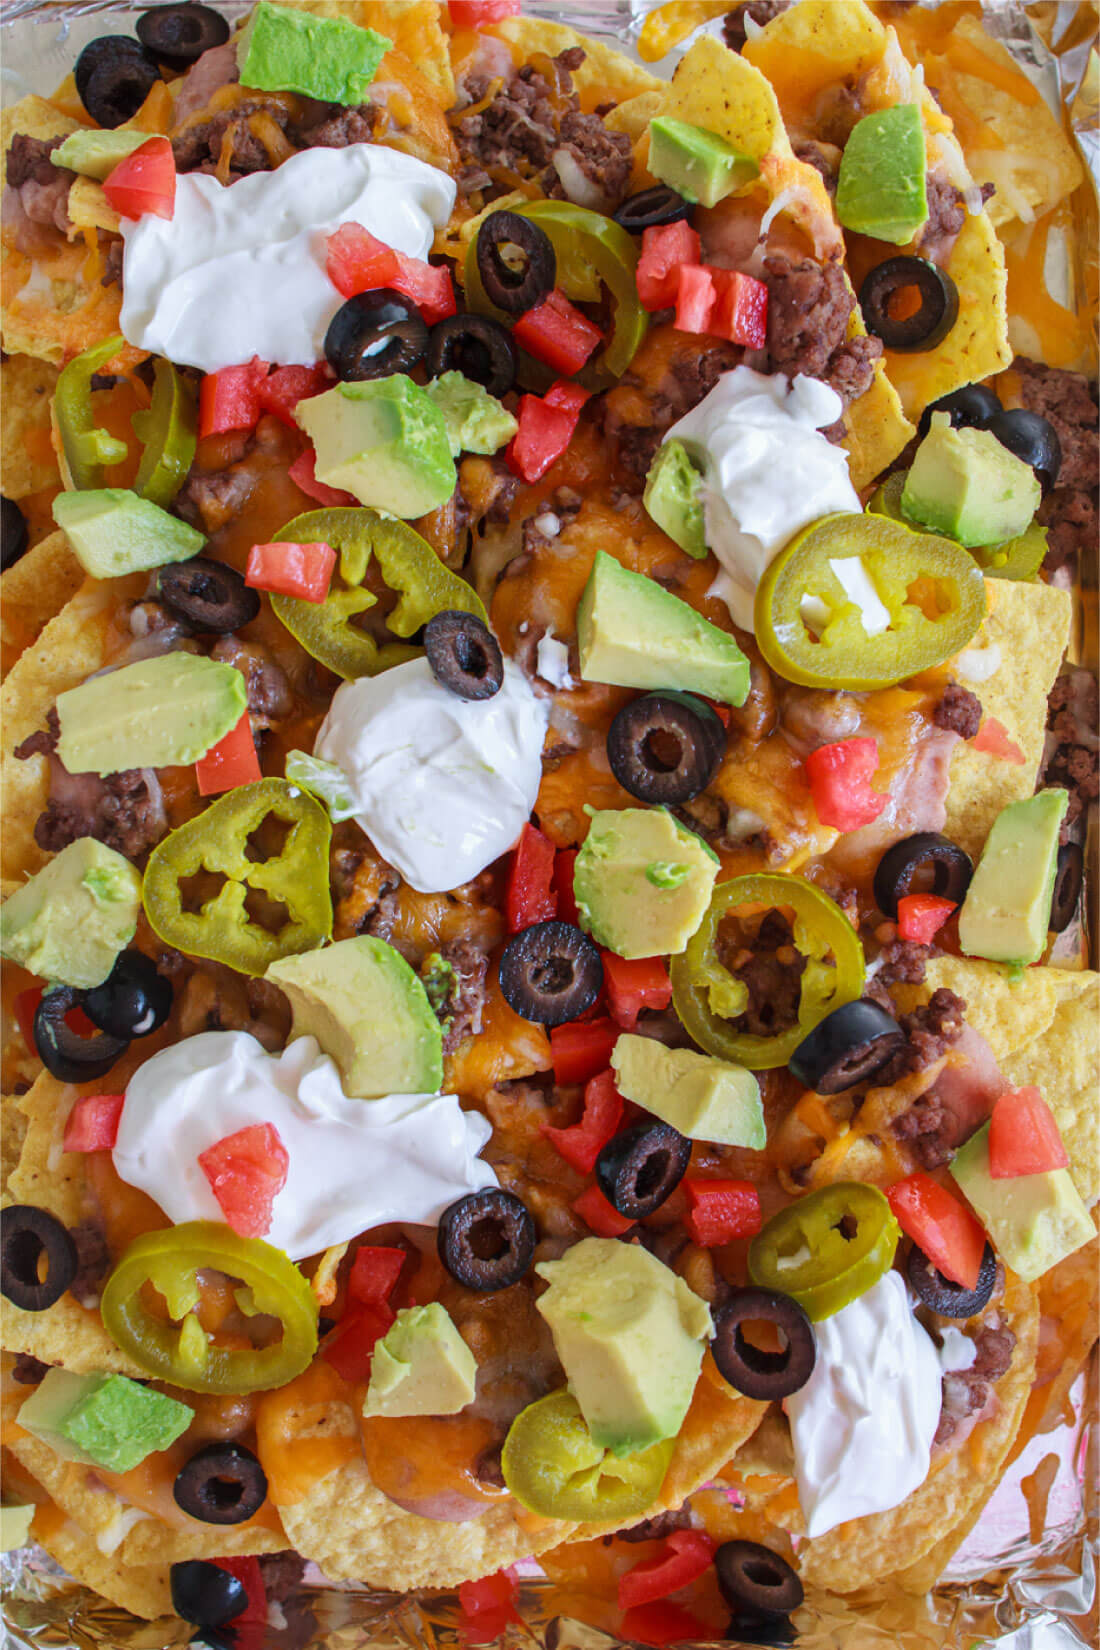 alliantie Toepassing advocaat How to Make Nachos in Oven | Easy Recipe from 30daysblog